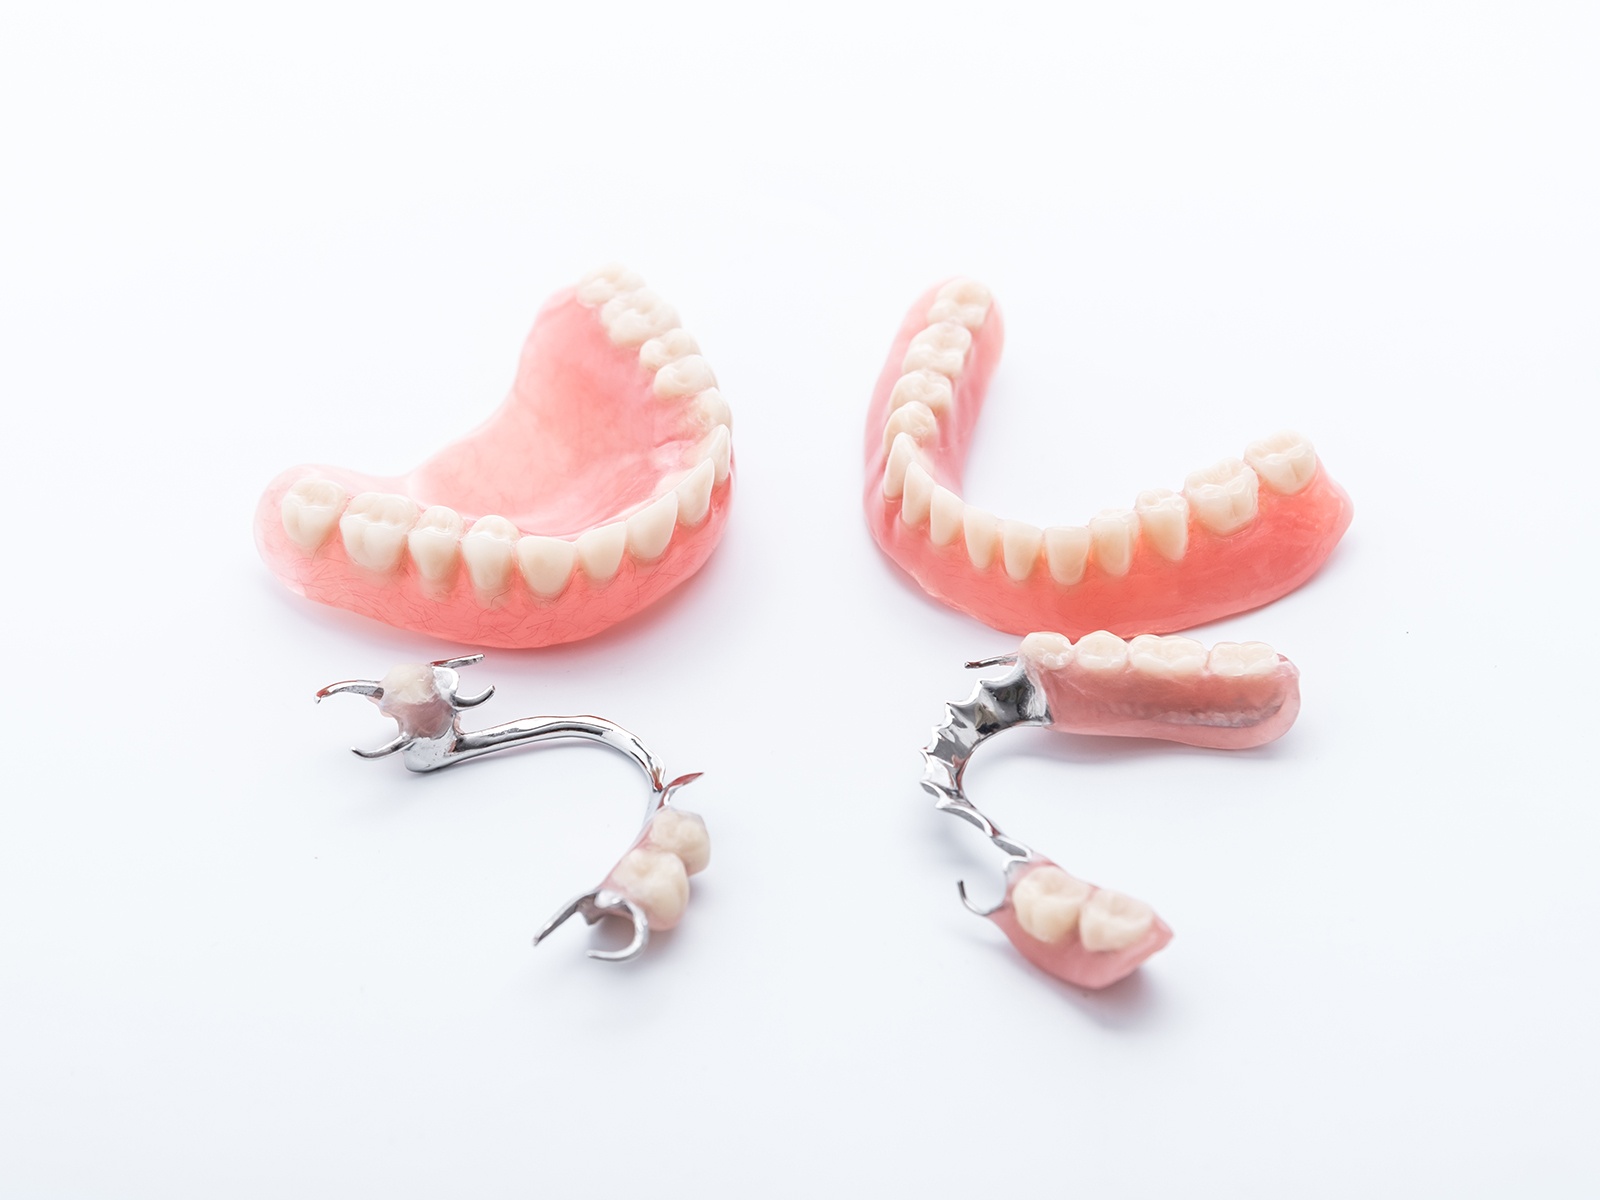 How Do You Fix Dentures That Are Too Big?